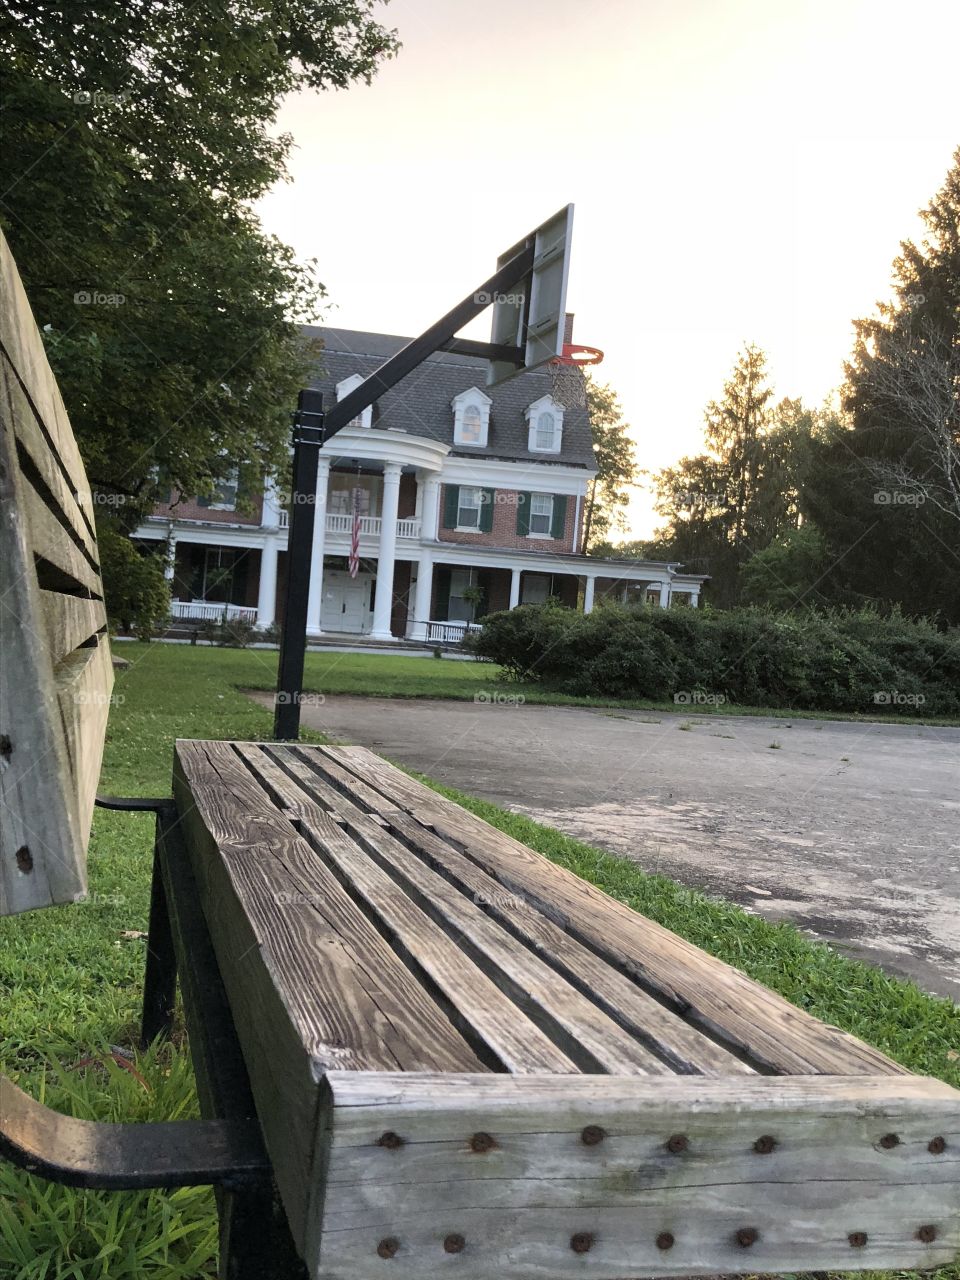 The rectangular shapes of the park bench lead the viewer’s eye to a very special basketball goal where I hit my first left handed layup as a kid. Post-sunset light trickles through the trees and illuminate the house and basketball court. 